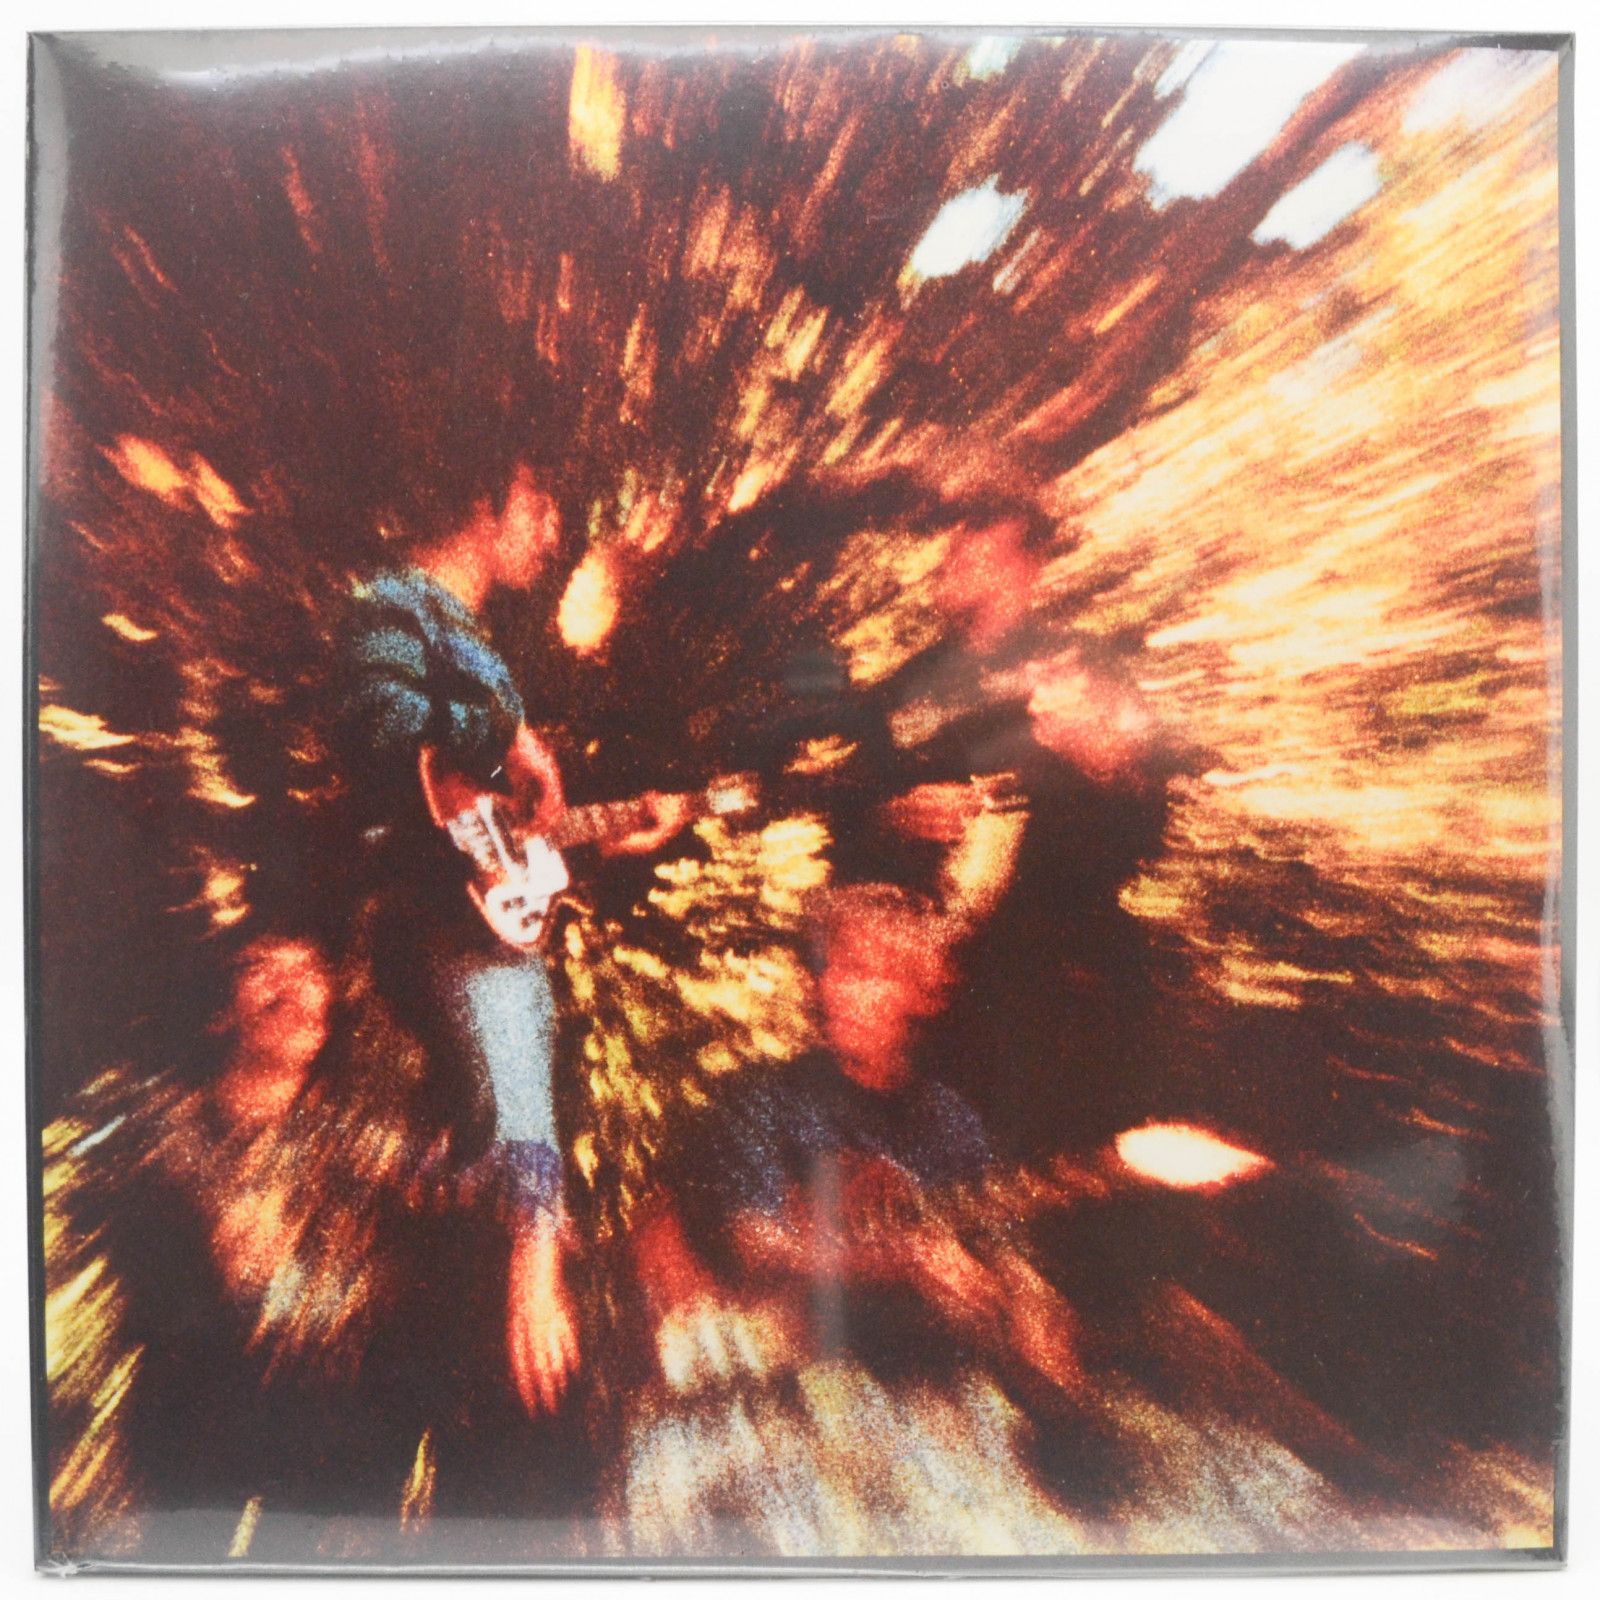 Creedence Clearwater Revival — Bayou Country, 1969